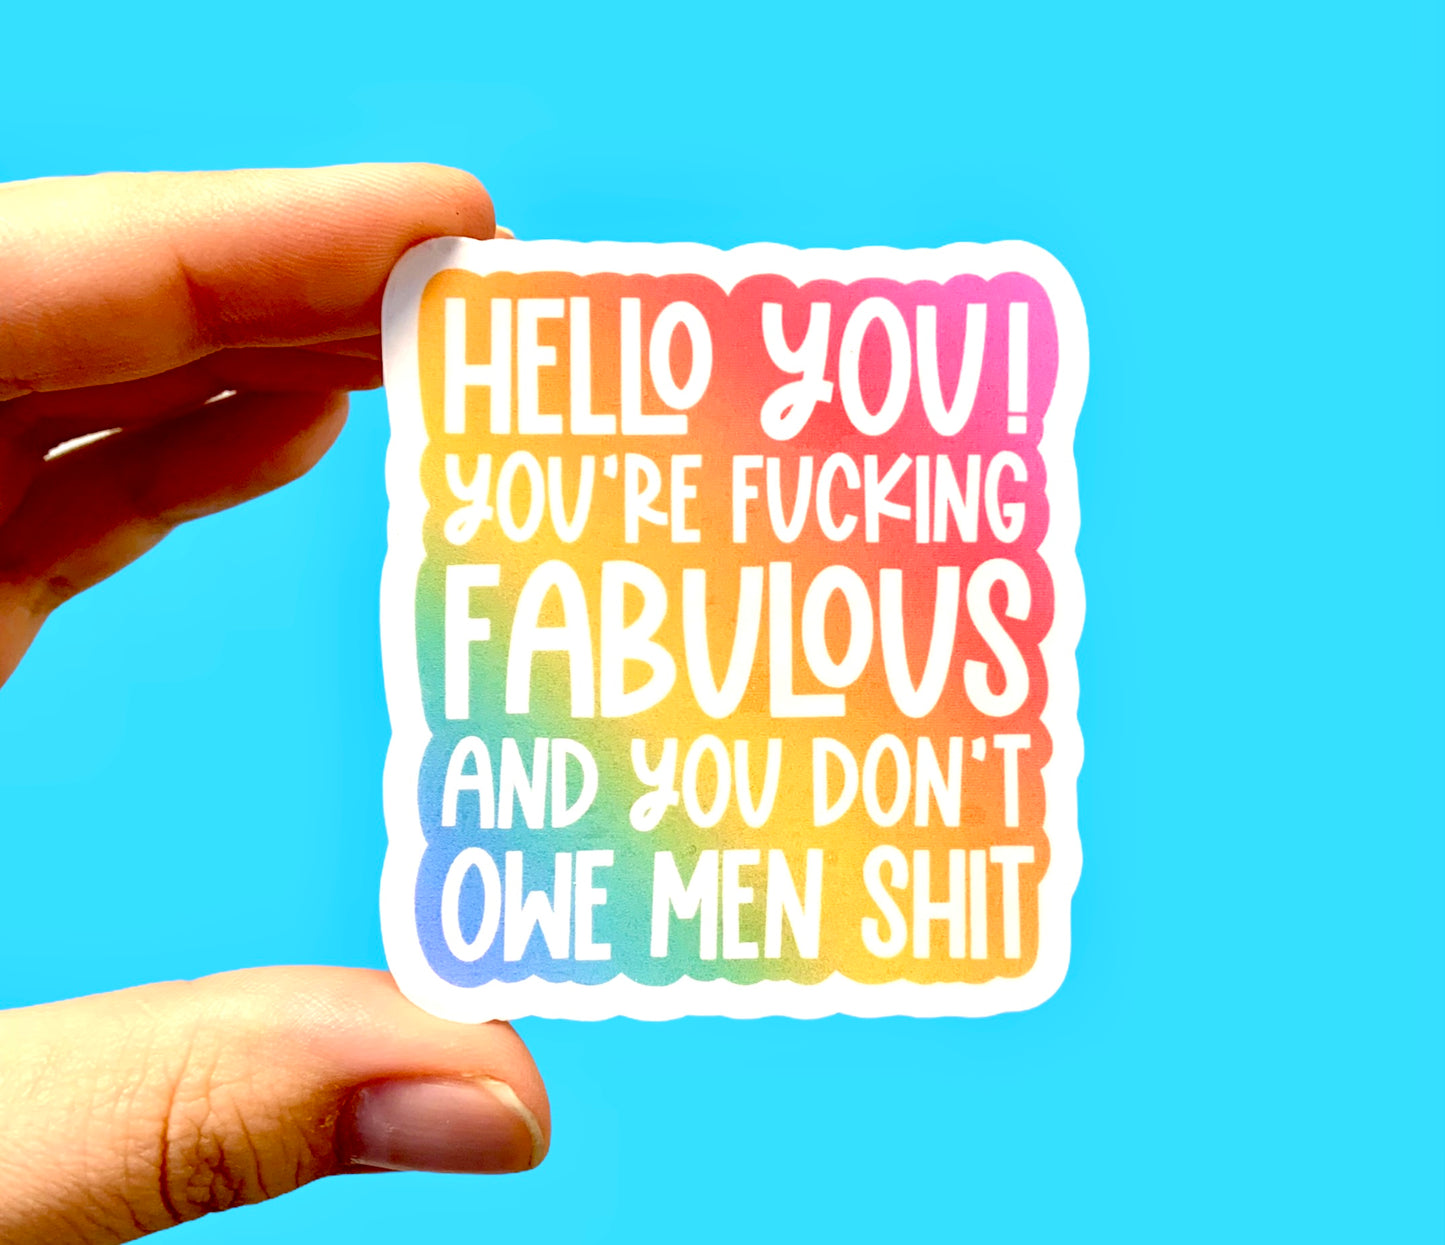 You’re fucking fabulous and you don’t owe men shit (pack of 3 or 5 stickers)